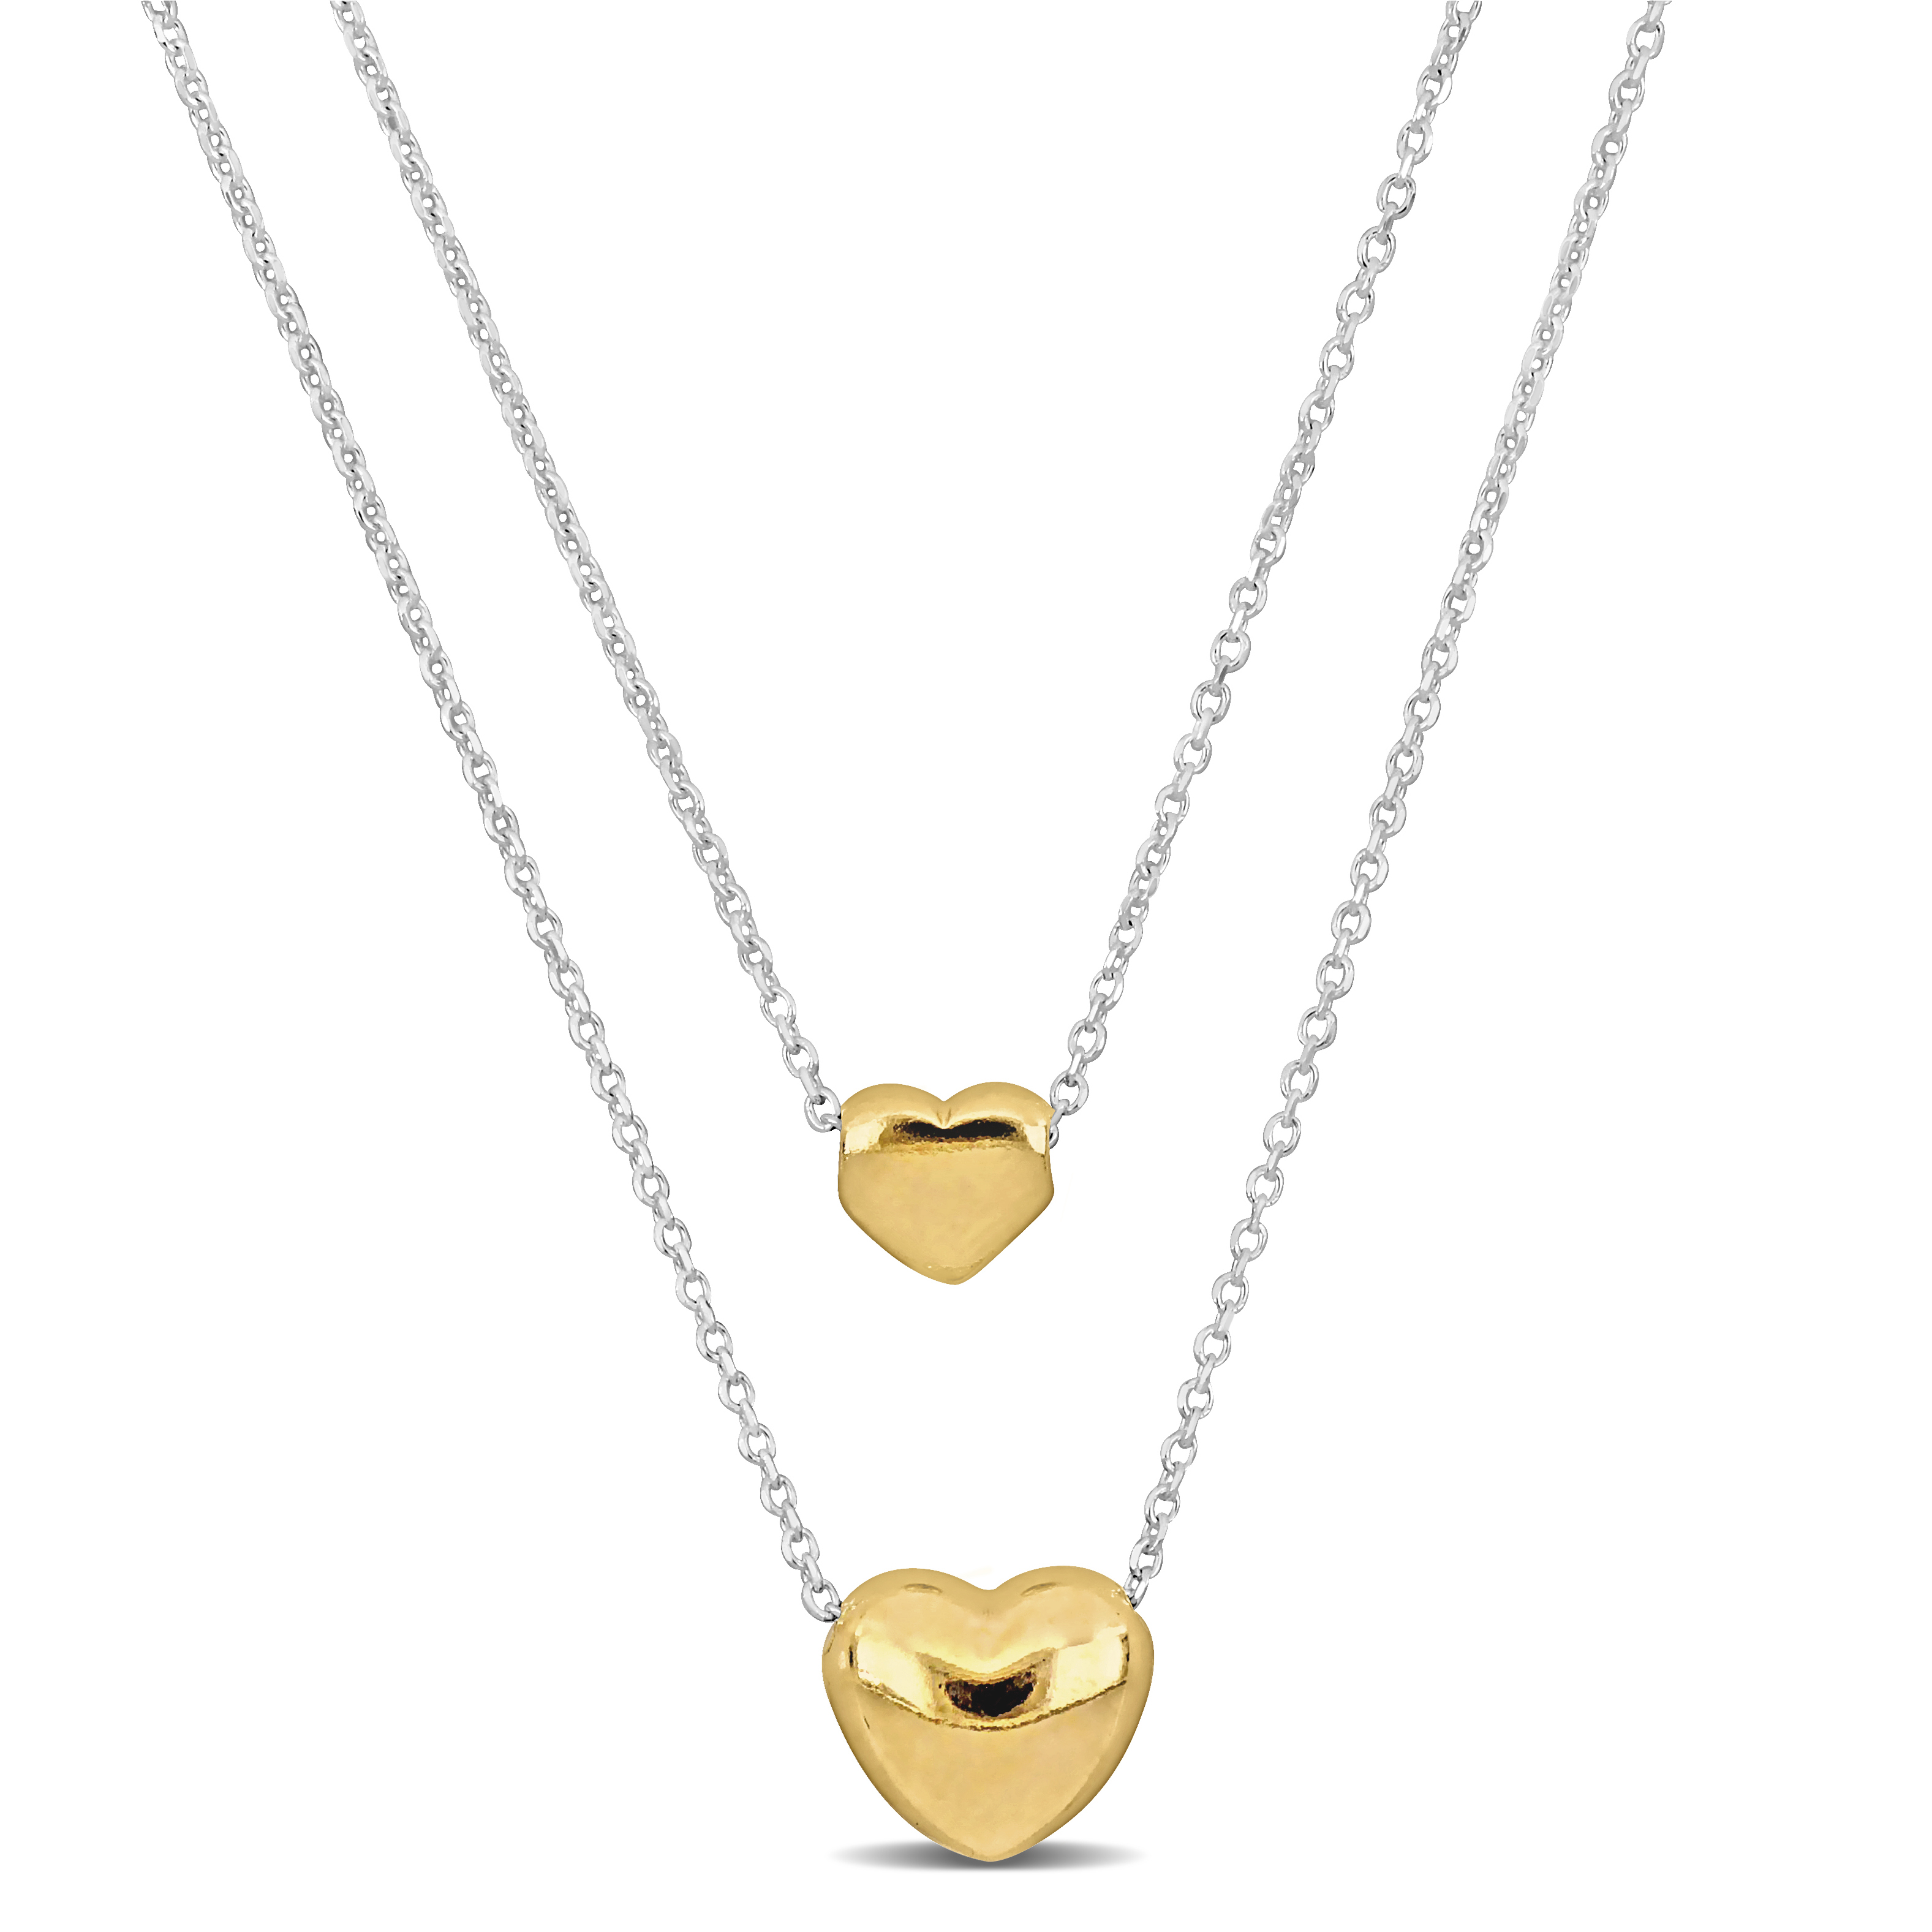 Yellow Two Heart Double Strand Necklace in Sterling Silver - 16+18 in.